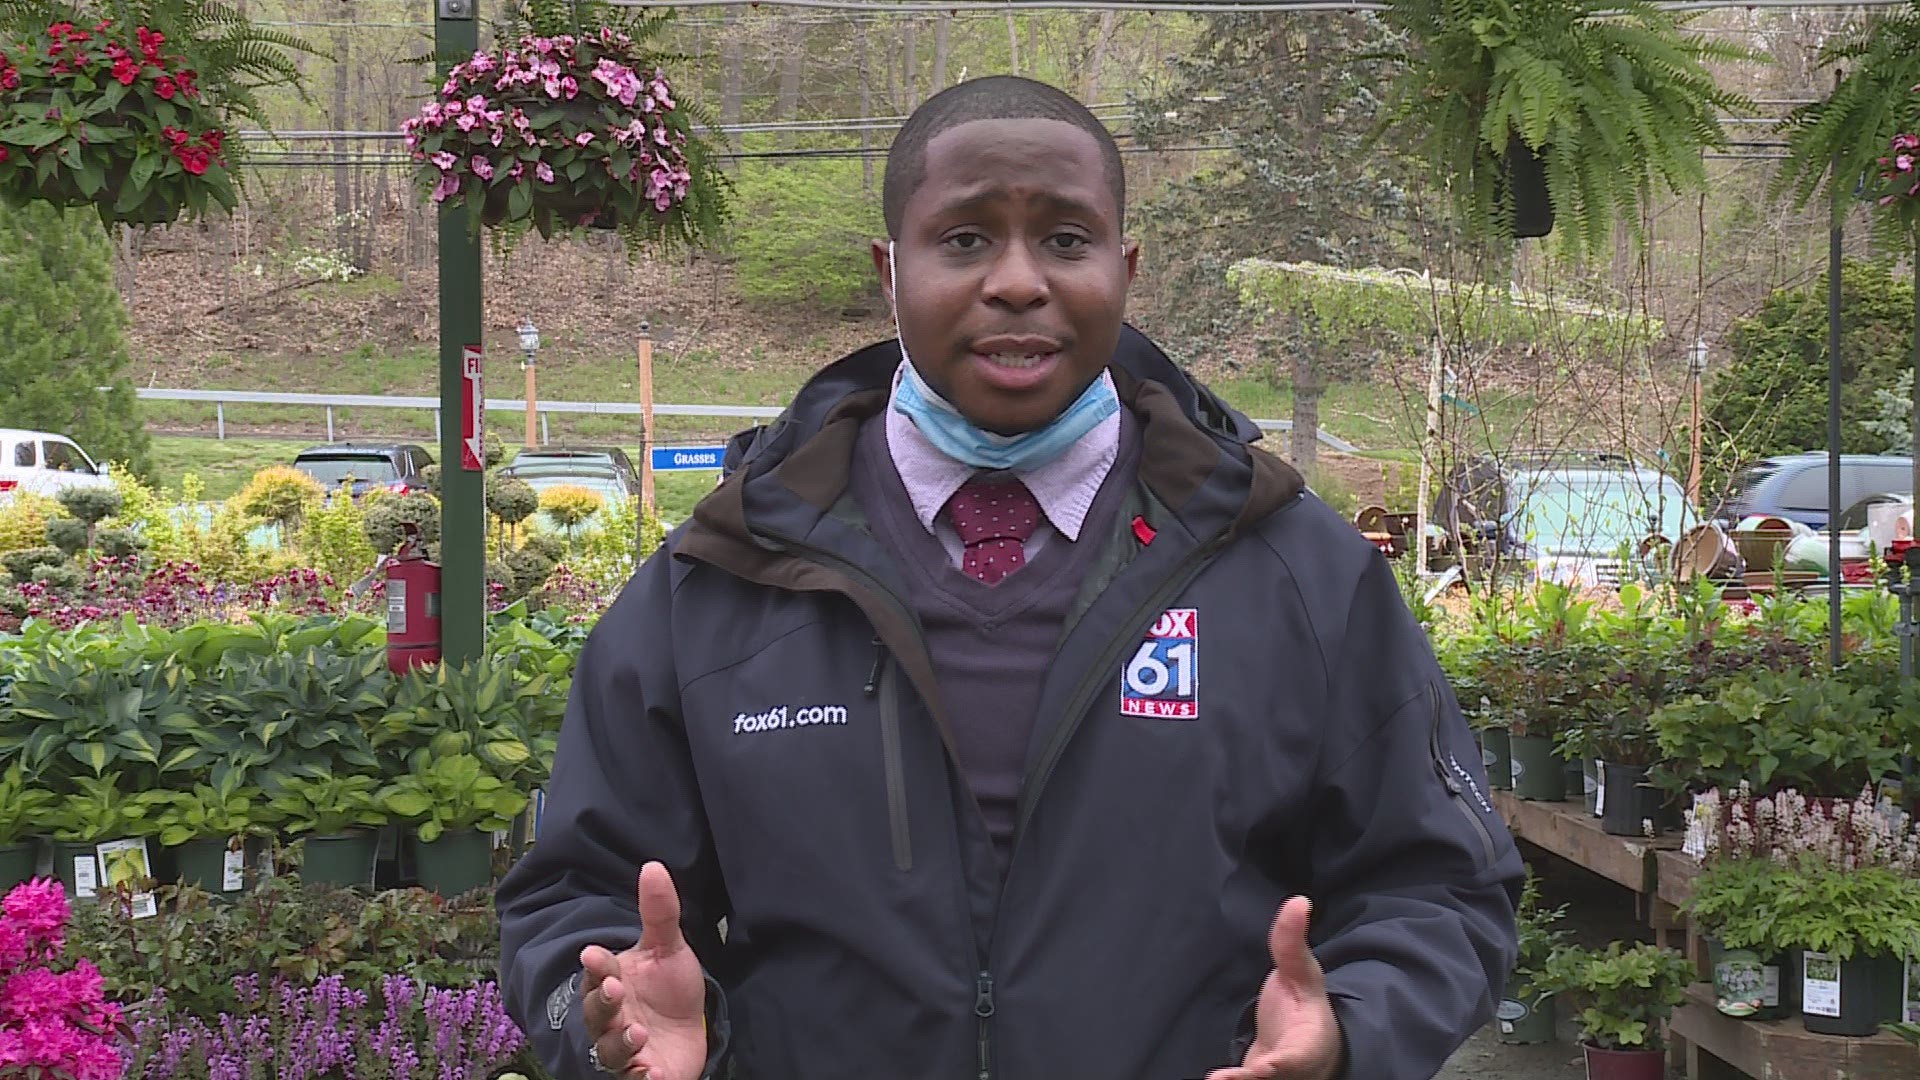 FOX61 spoke with The Garden Barn in Vernon to help explain what will happen to certain plants when the frost hits the region at an unexpected time.